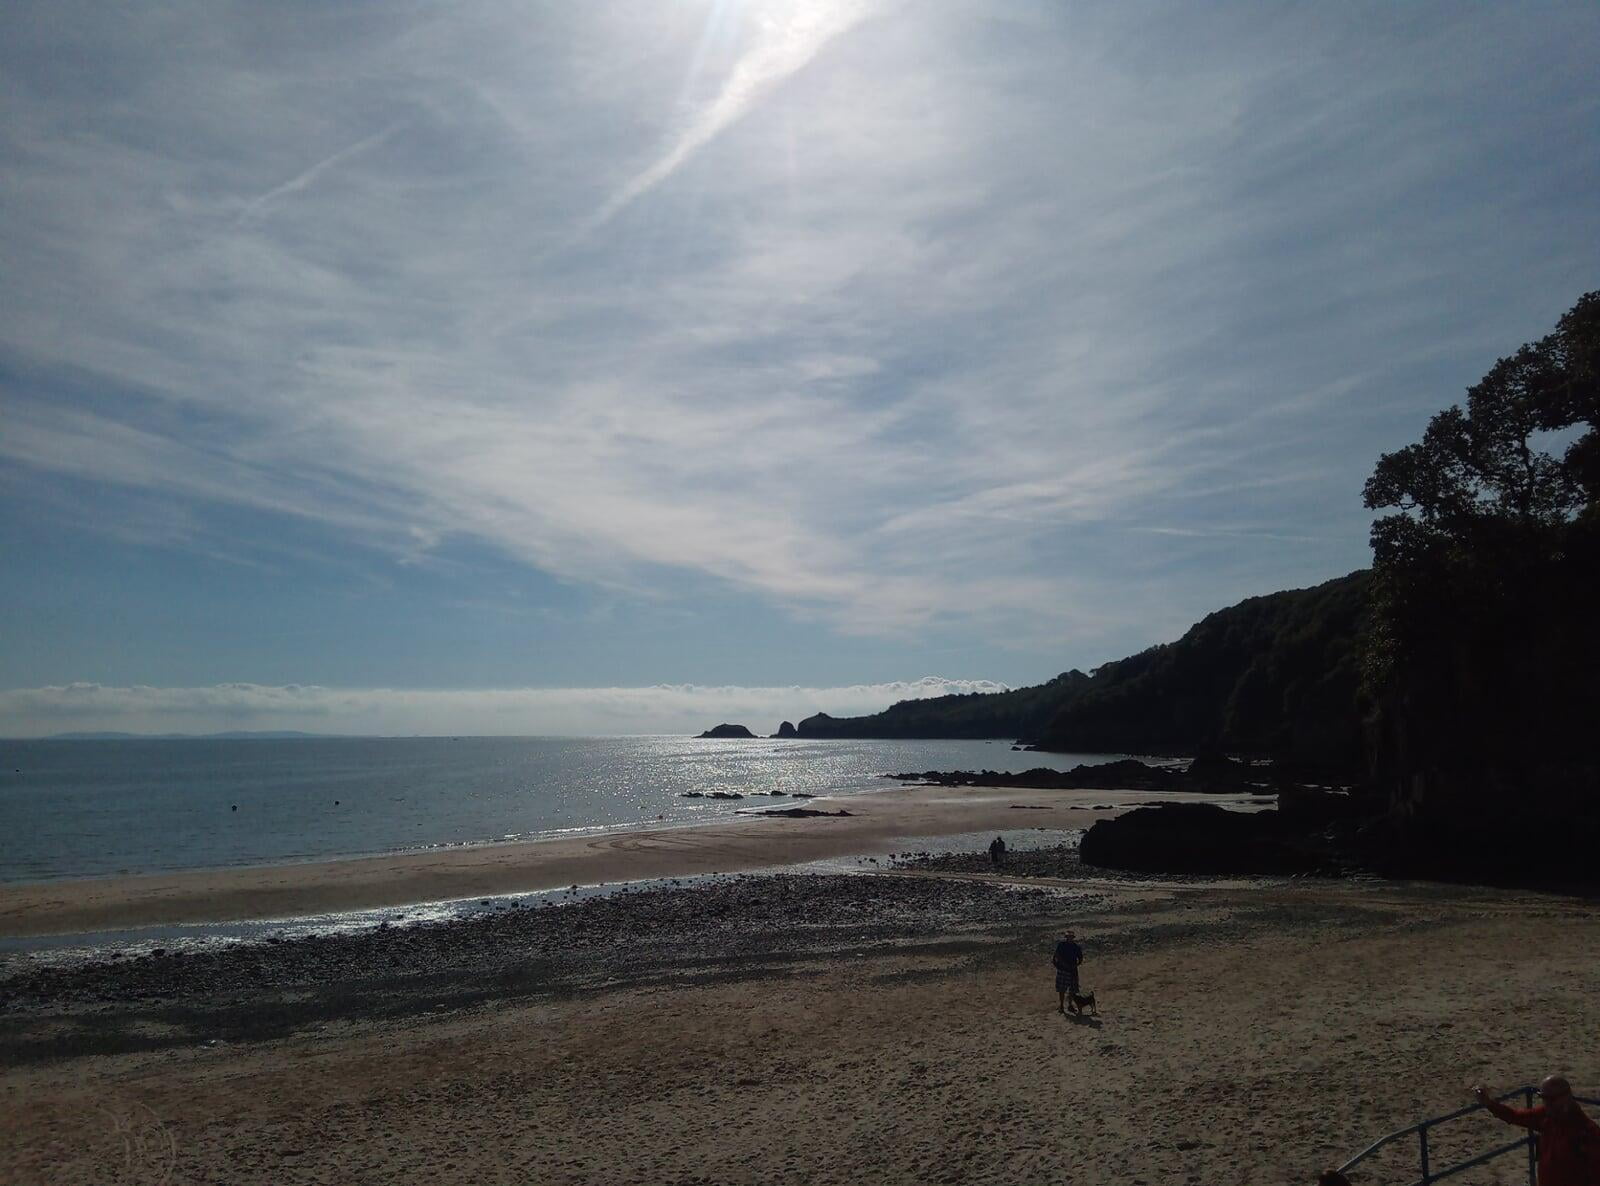 Sea swimming in Saundersfoot UK is safe and great for novices